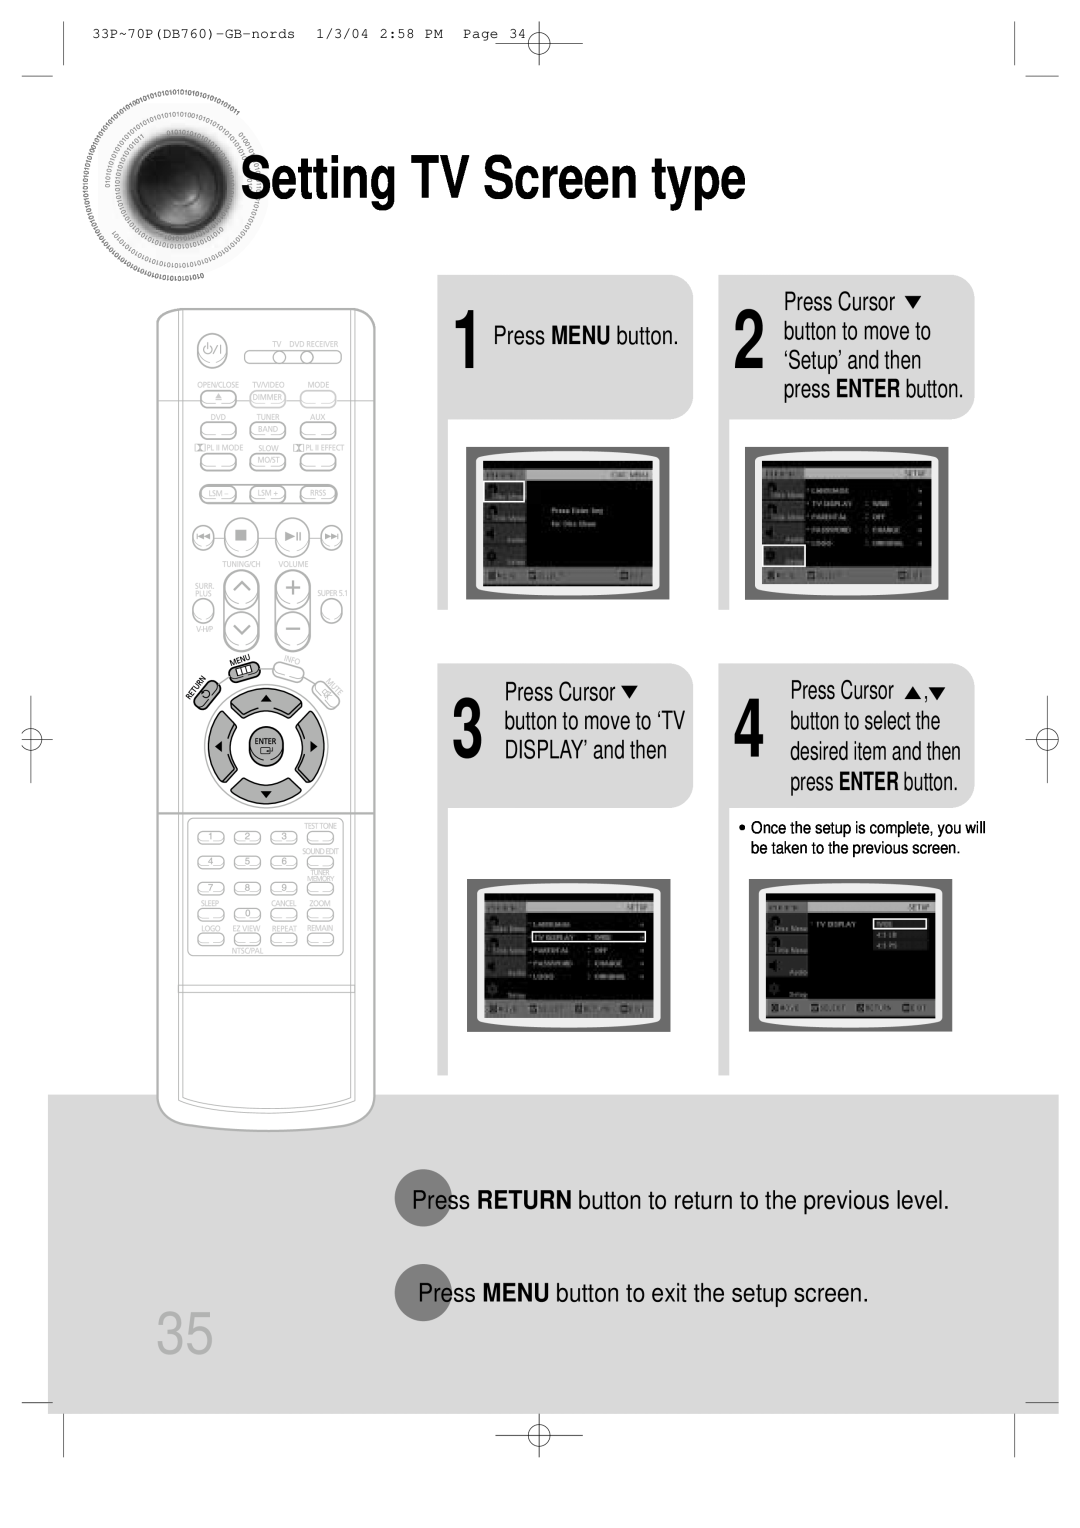 Samsung HTDB760TTH/FES manual Setting TV Screen type, DISPLAY’ and then, Press Cursor 2 button to move to ‘Setup’ and then 